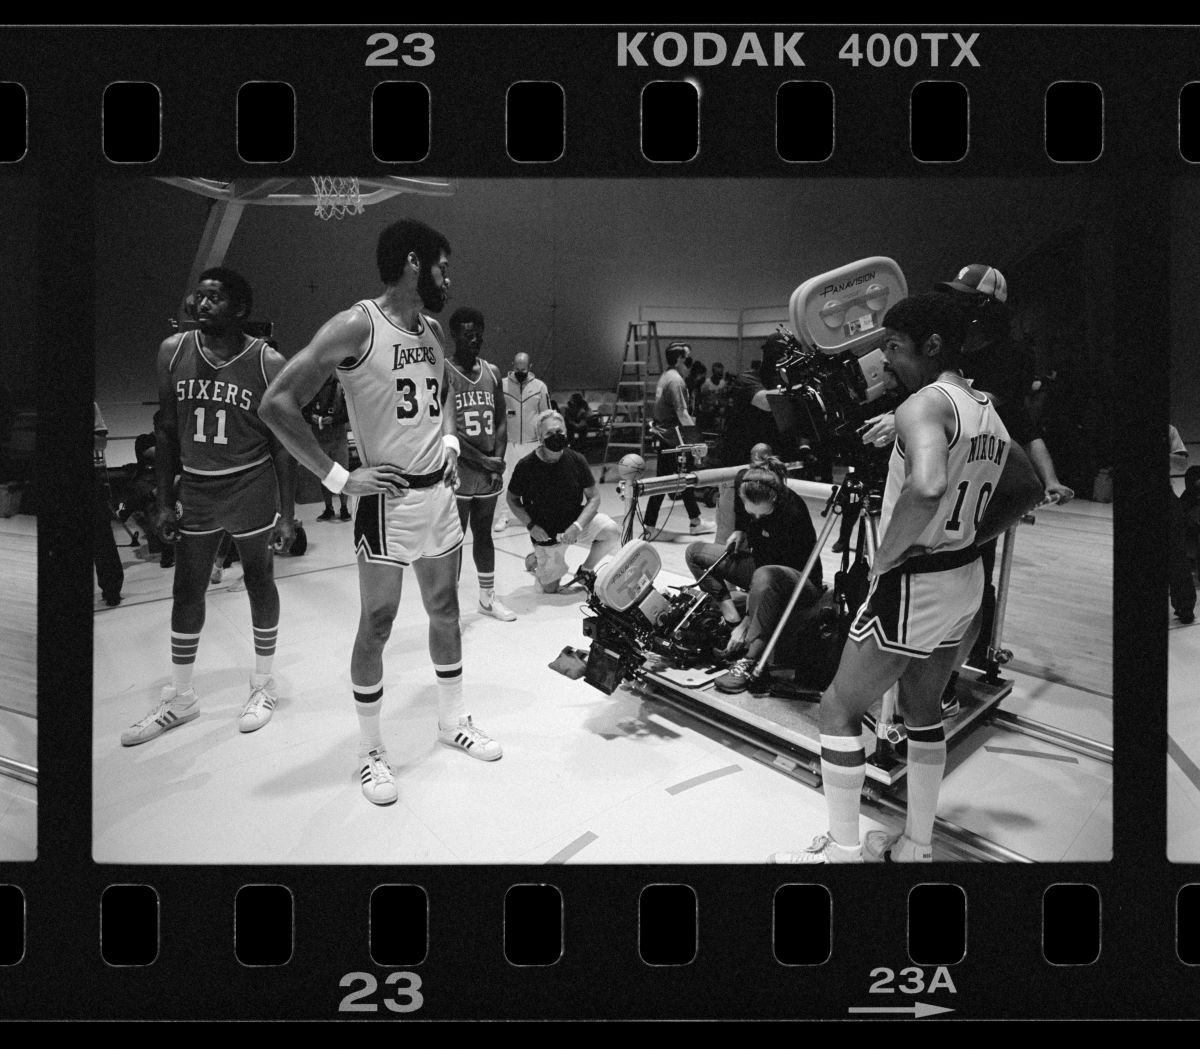 Prepping a dolly shot for a game sequence in which the Lakers battle the Philadelphia 76ers.